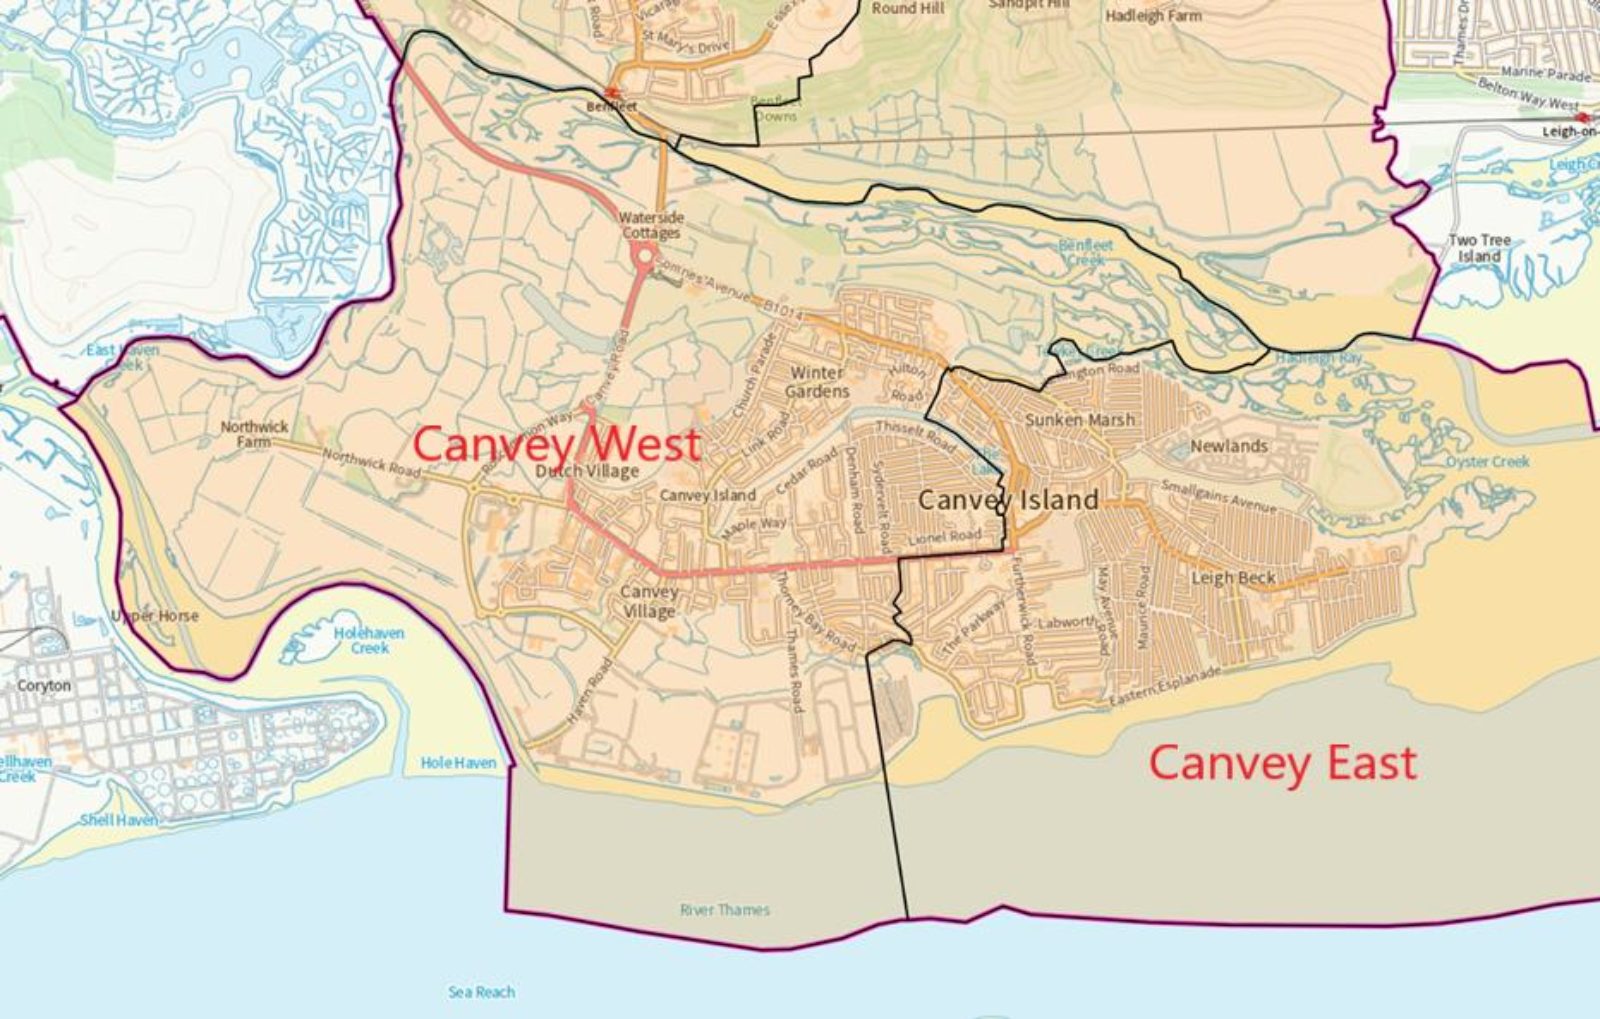 County Divisions on Canvey Island